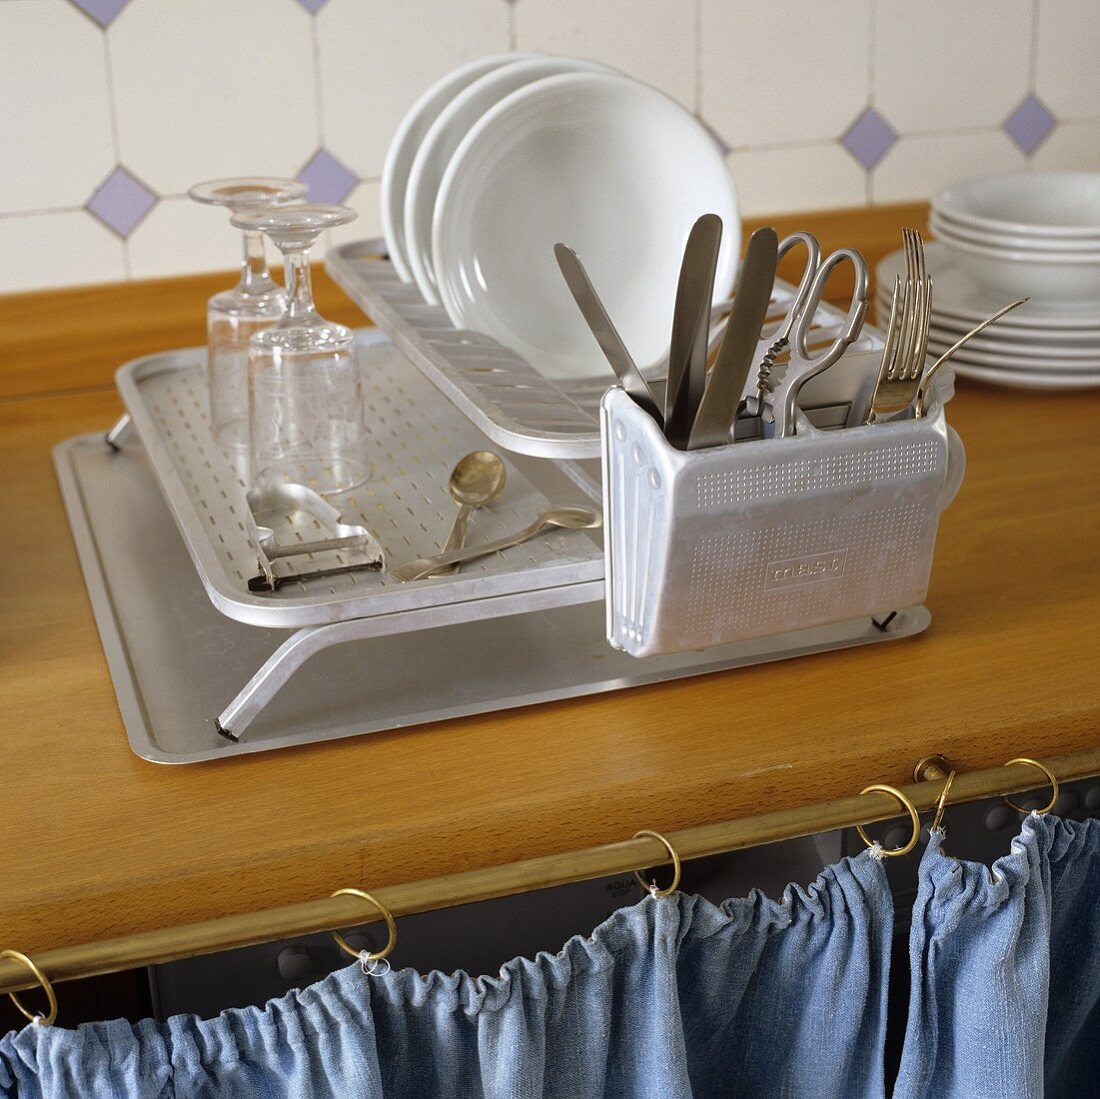 A drainer on a tray